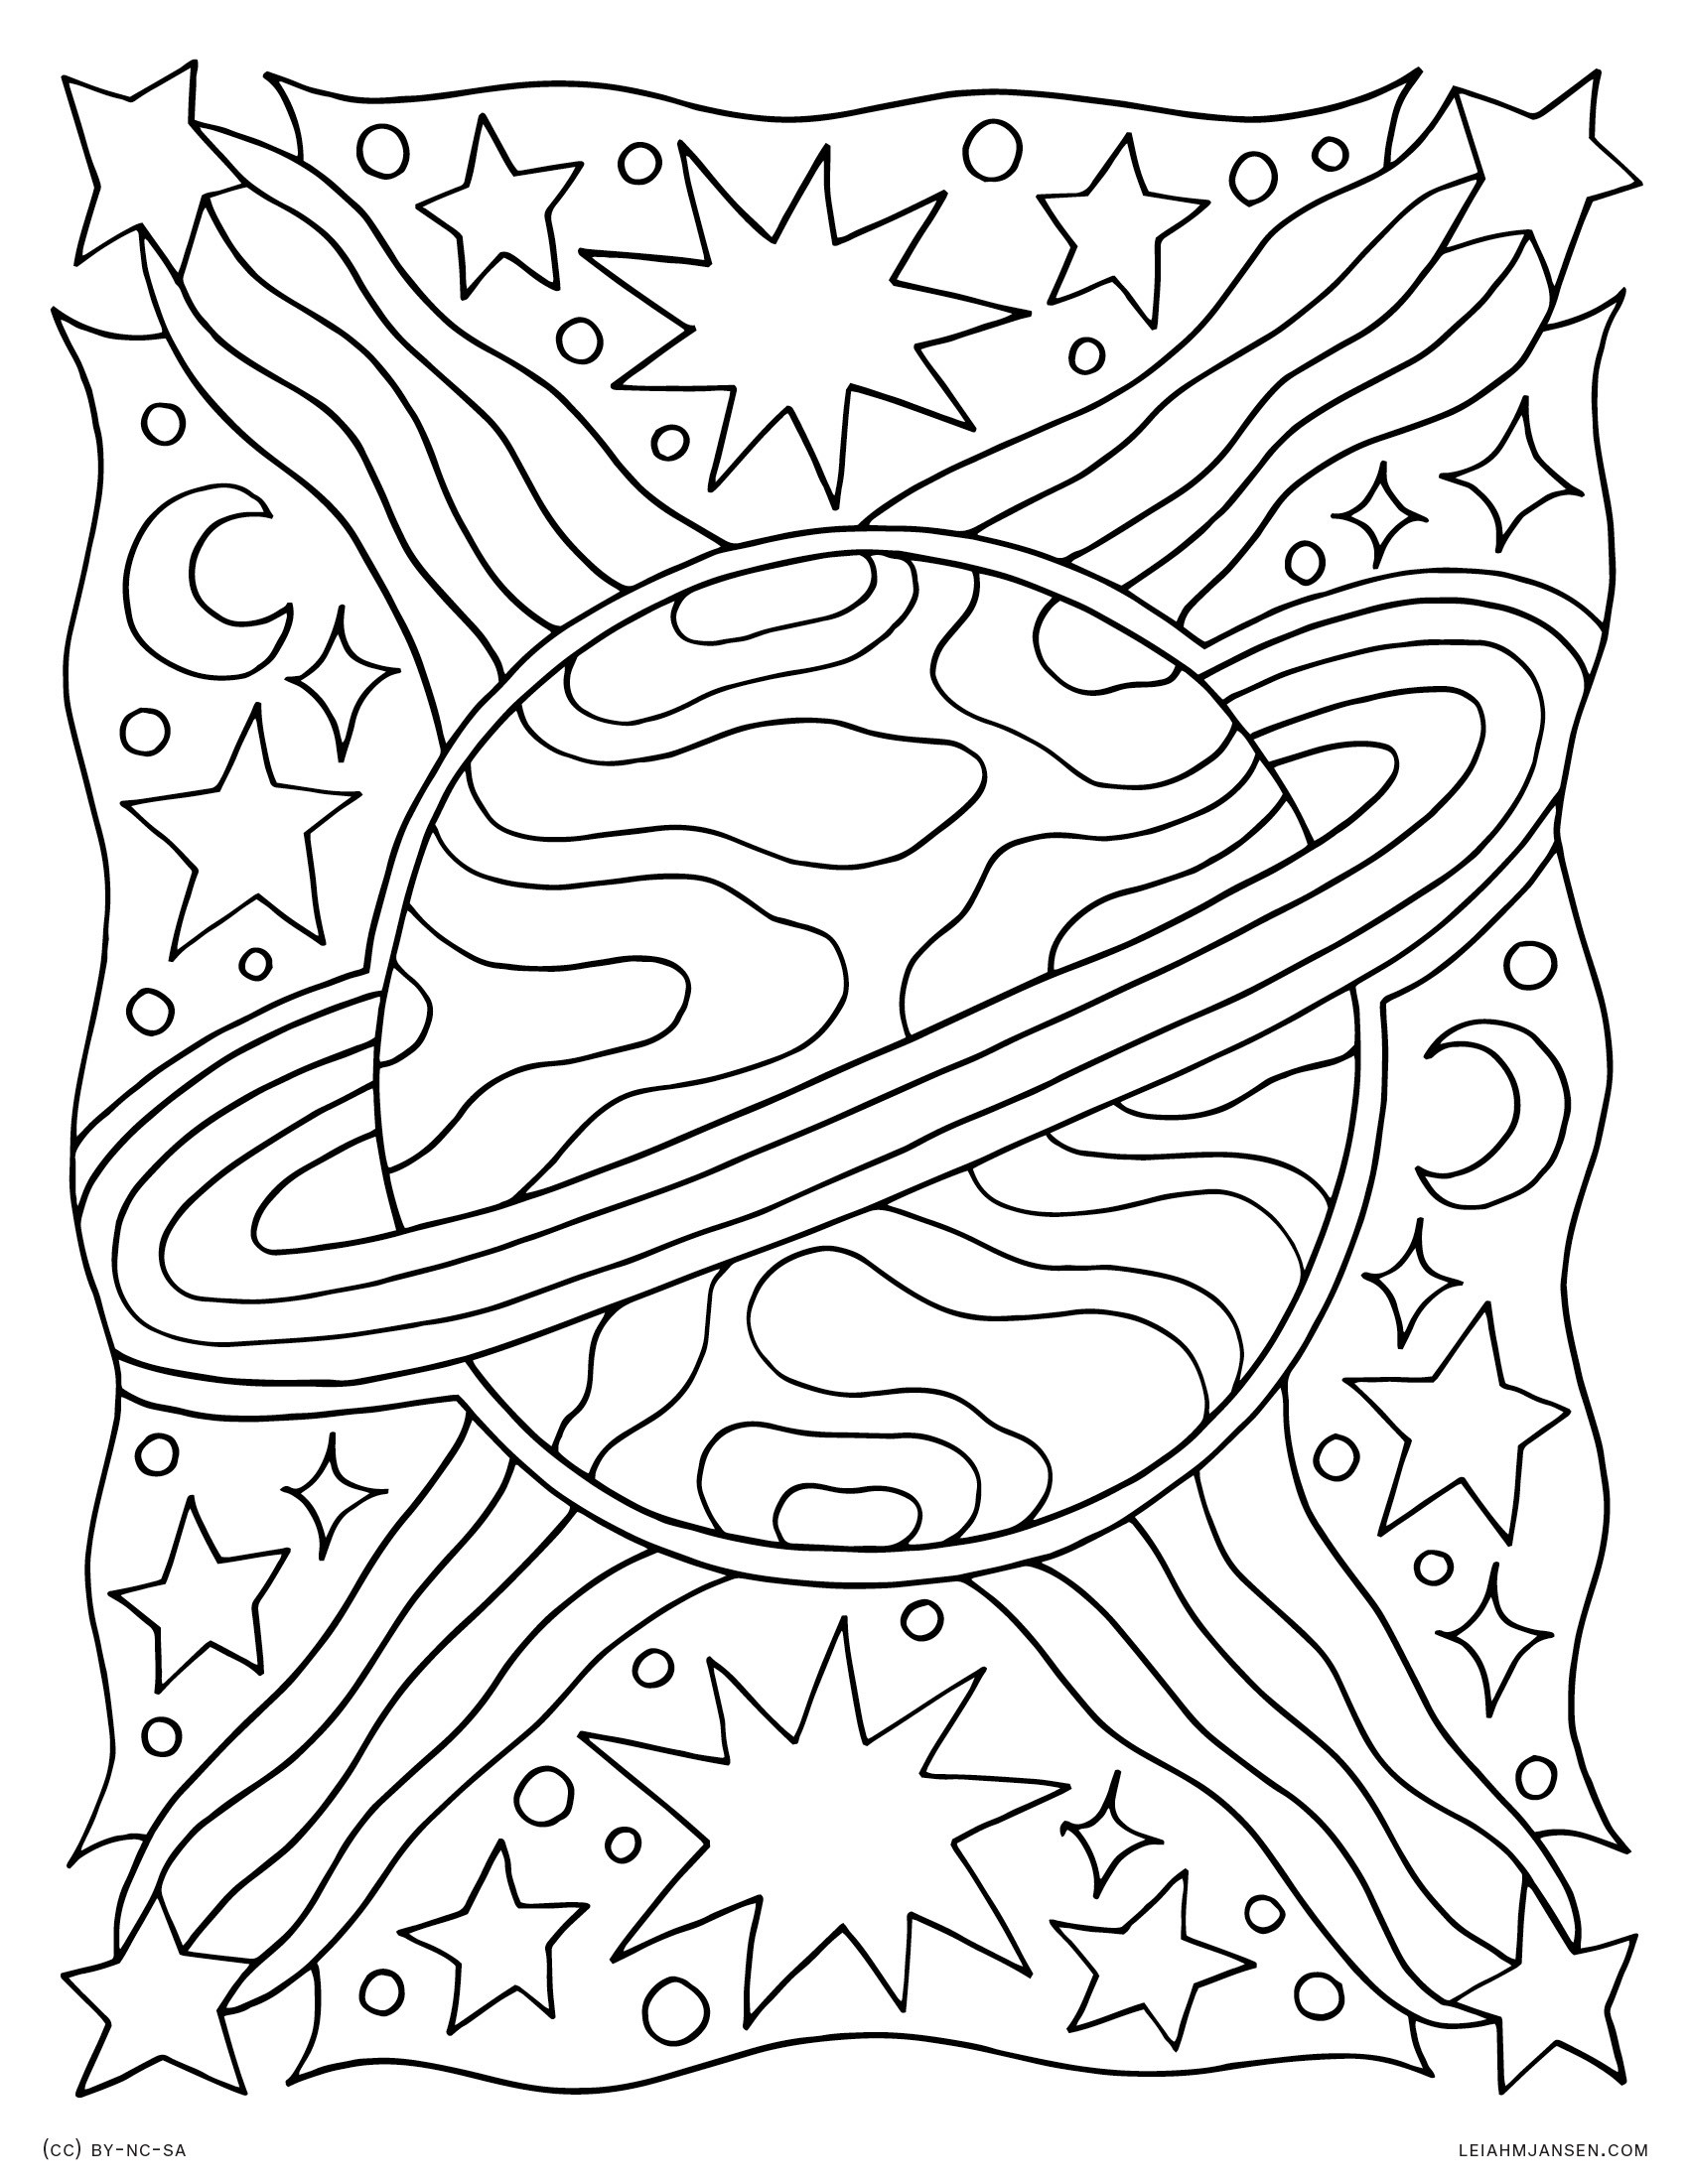 Printable Space Coloring Pages
 Coloring Pages